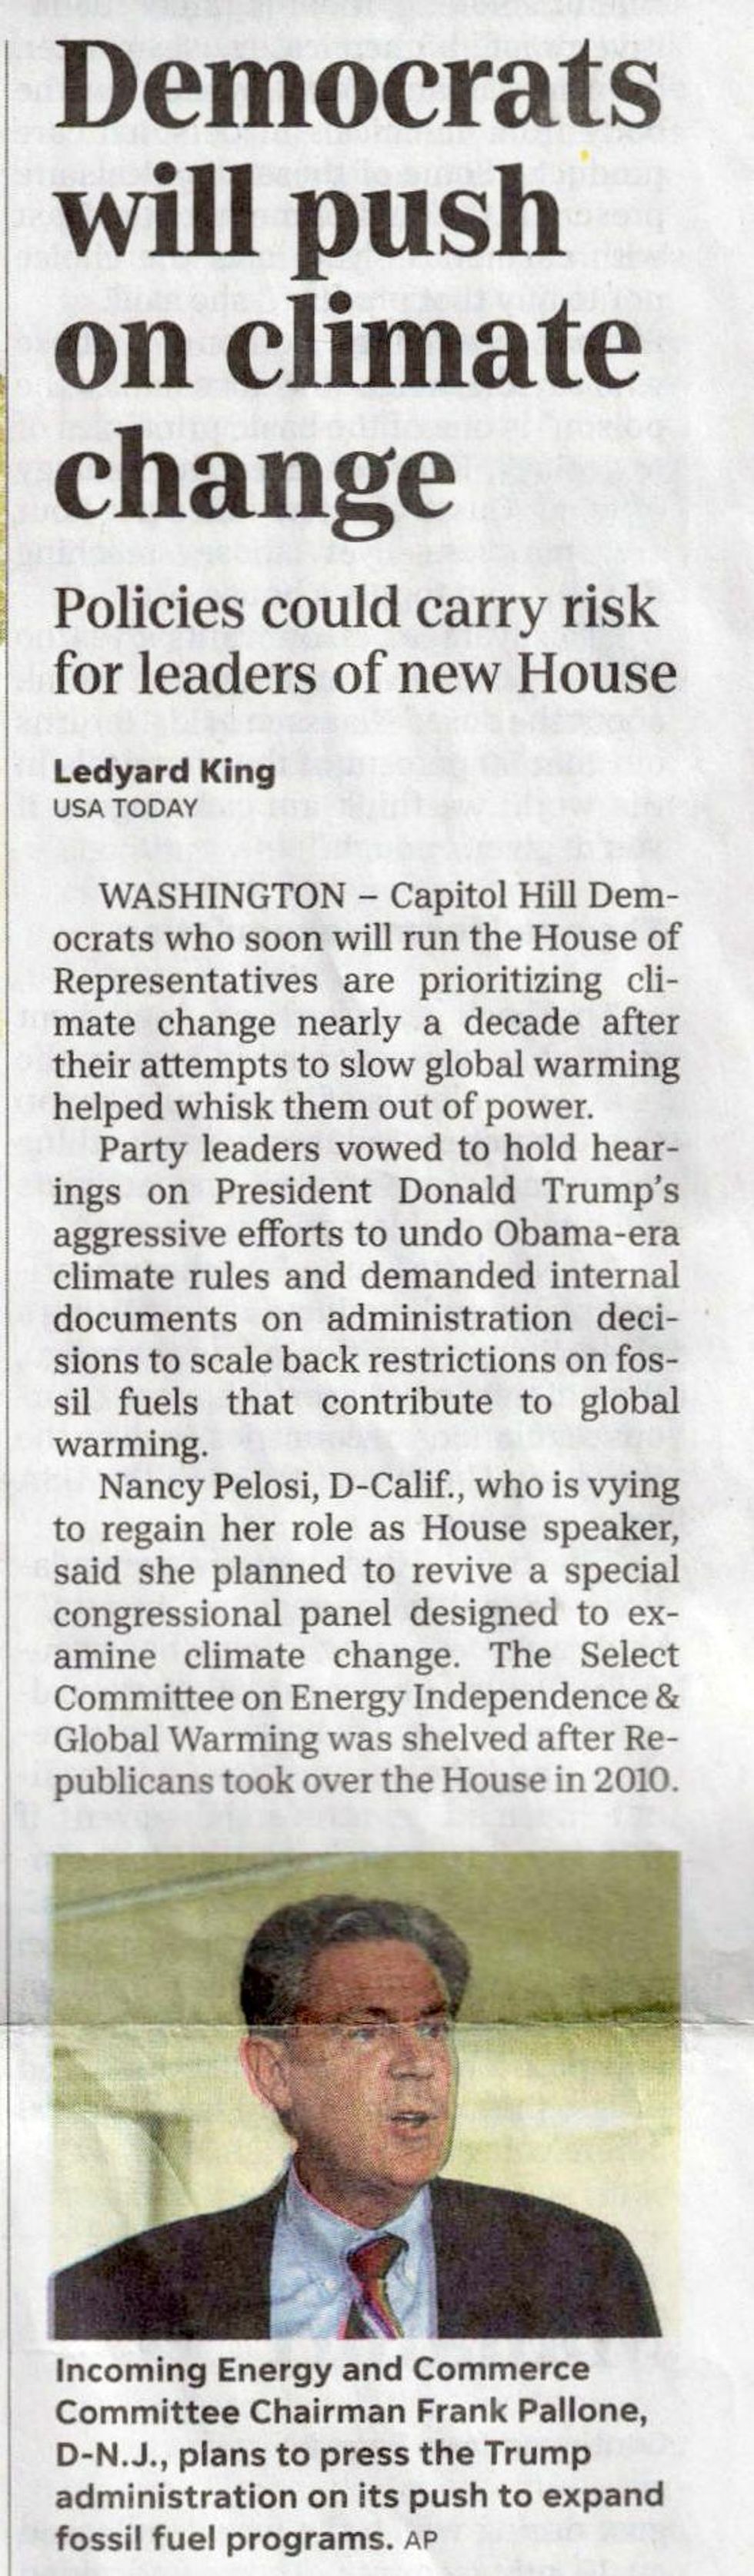 USA Today: Democrats Will Push on Climate Change